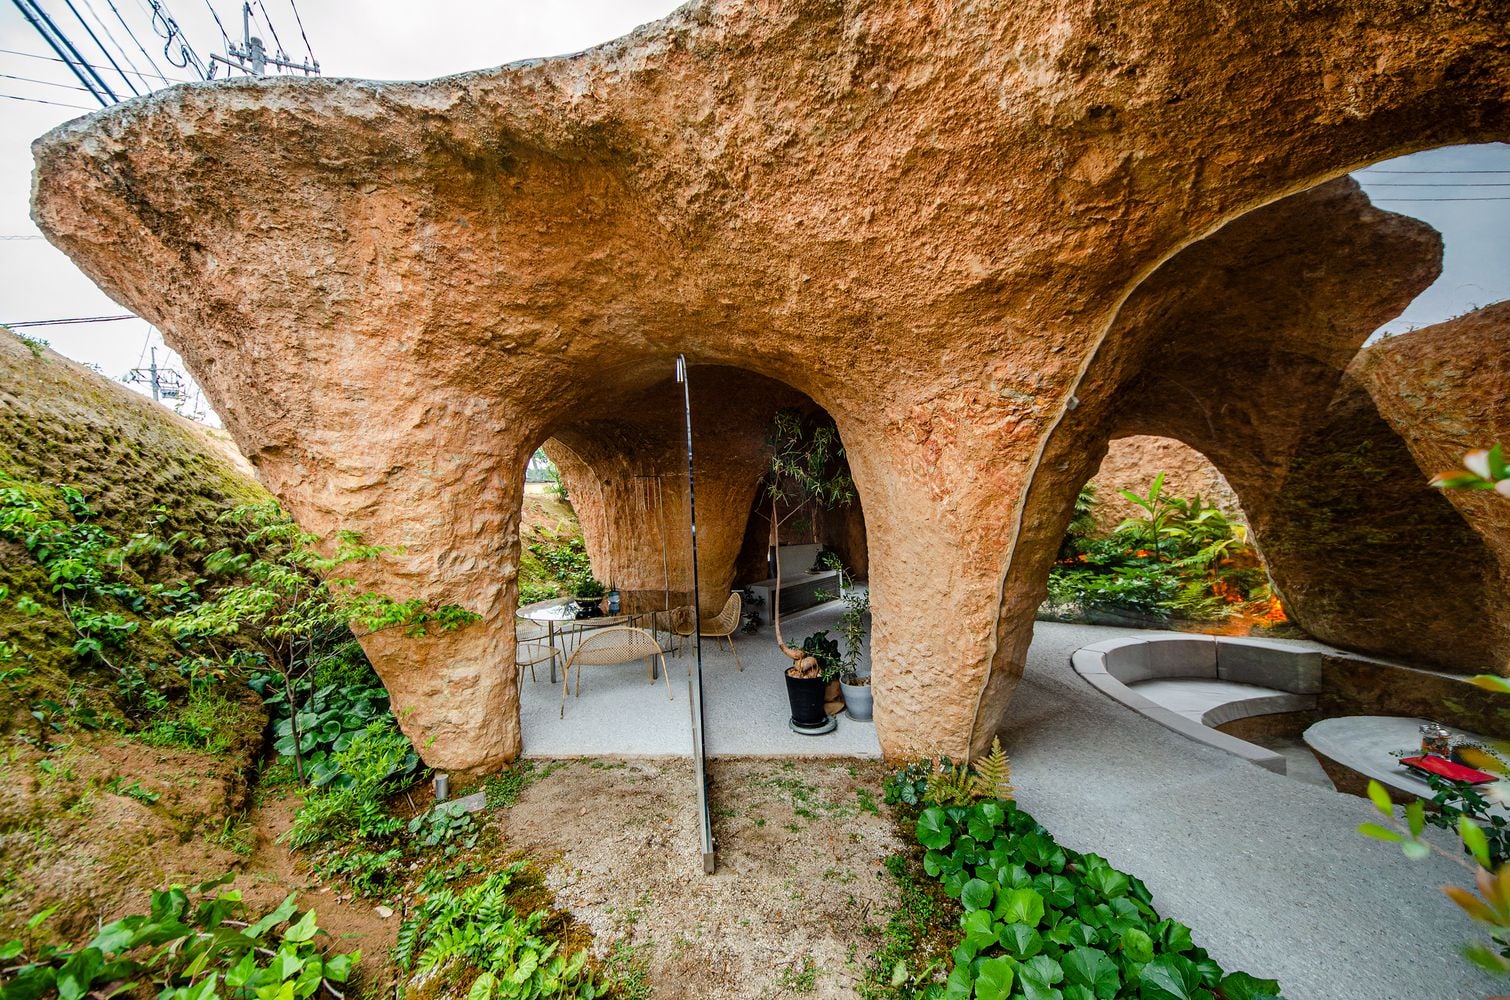 Semi-covered patio space in the Junya Ishigami-designed House and Restaurant Cave.